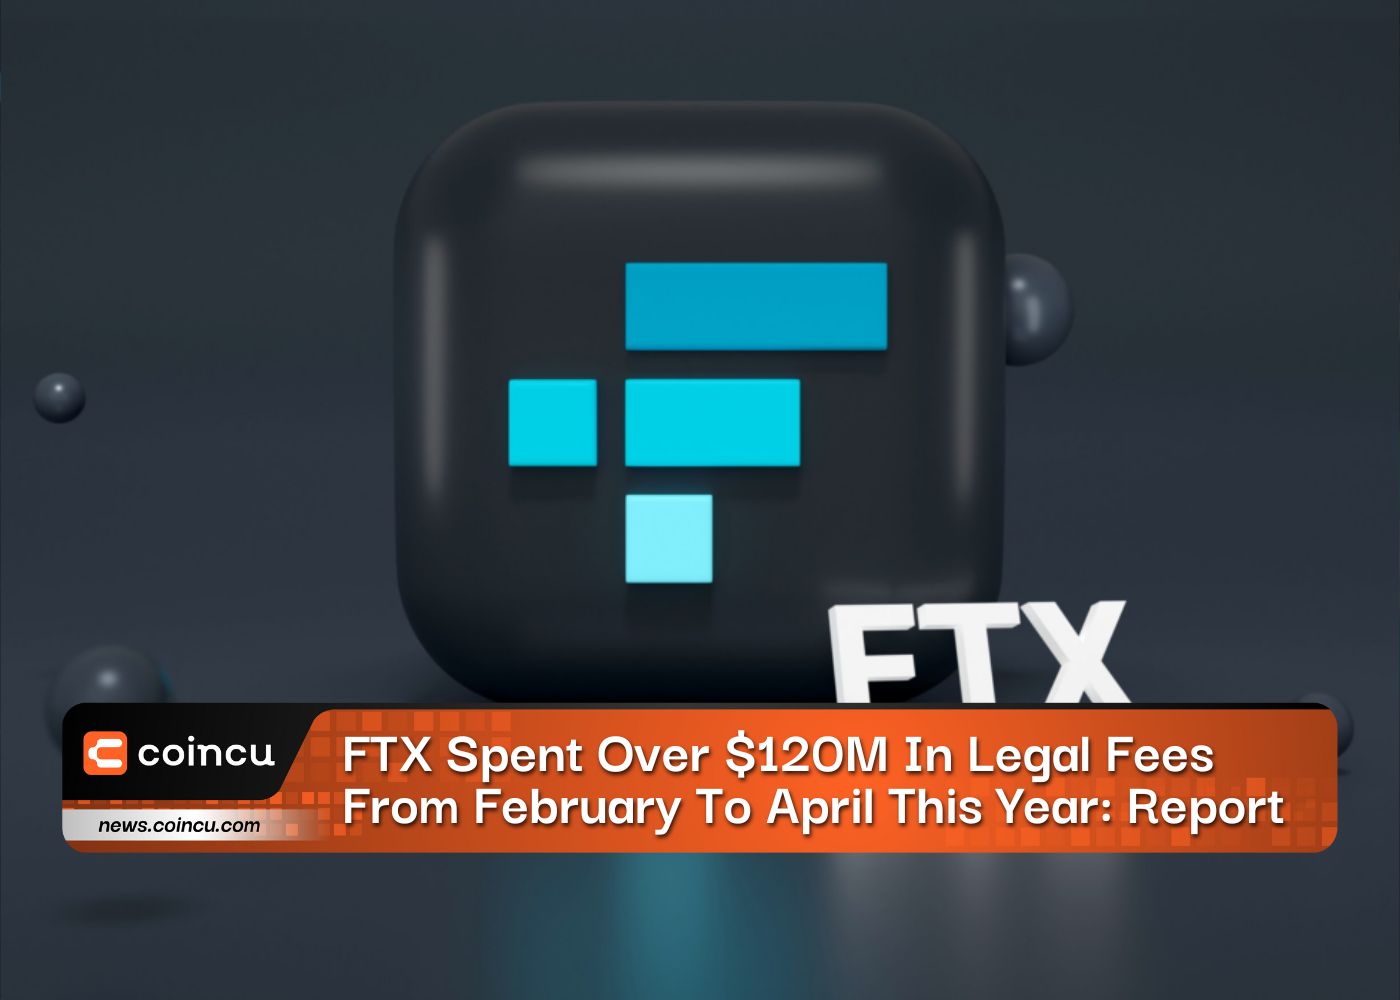 FTX Spent Over $120M In Legal Fees From February To April This Year: Report